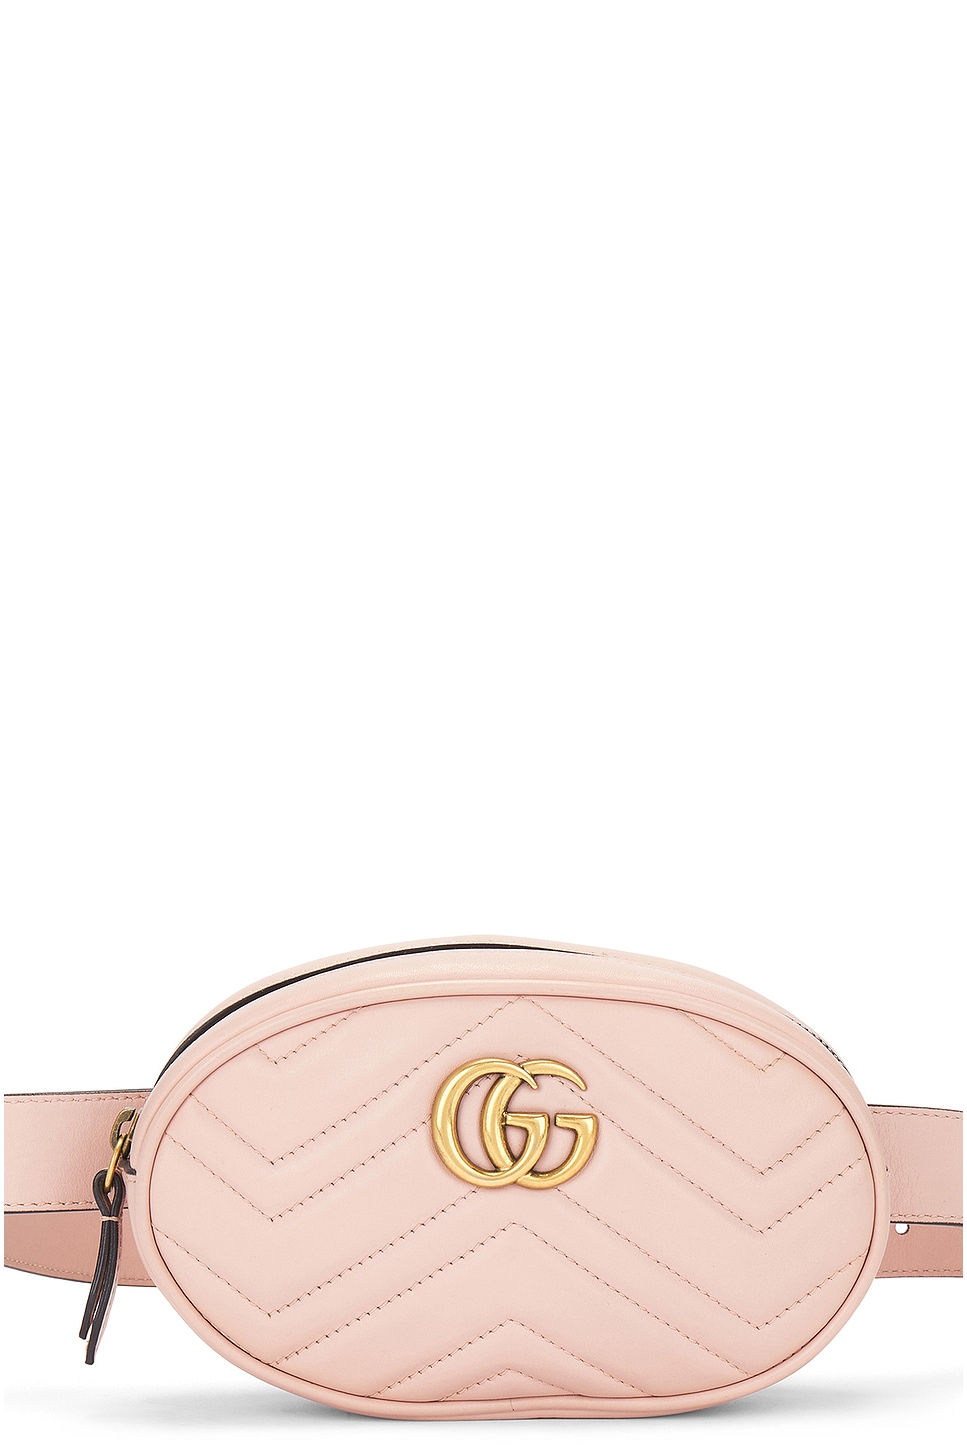 Gucci Marmont Leather Waist Bag In Gold